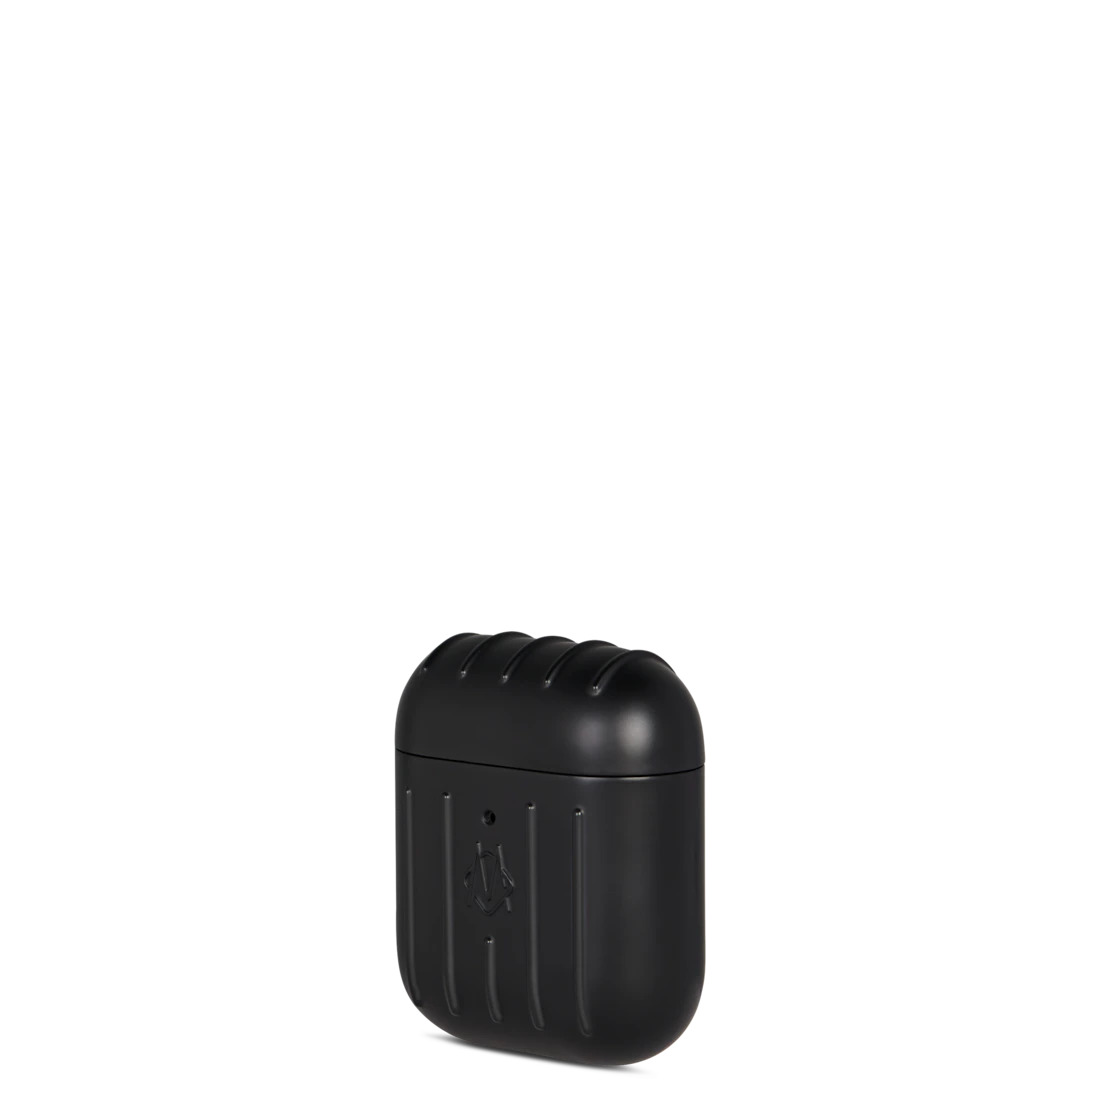 iPhone Accessories Matte Black Case for AirPods 1 & 2 - 2